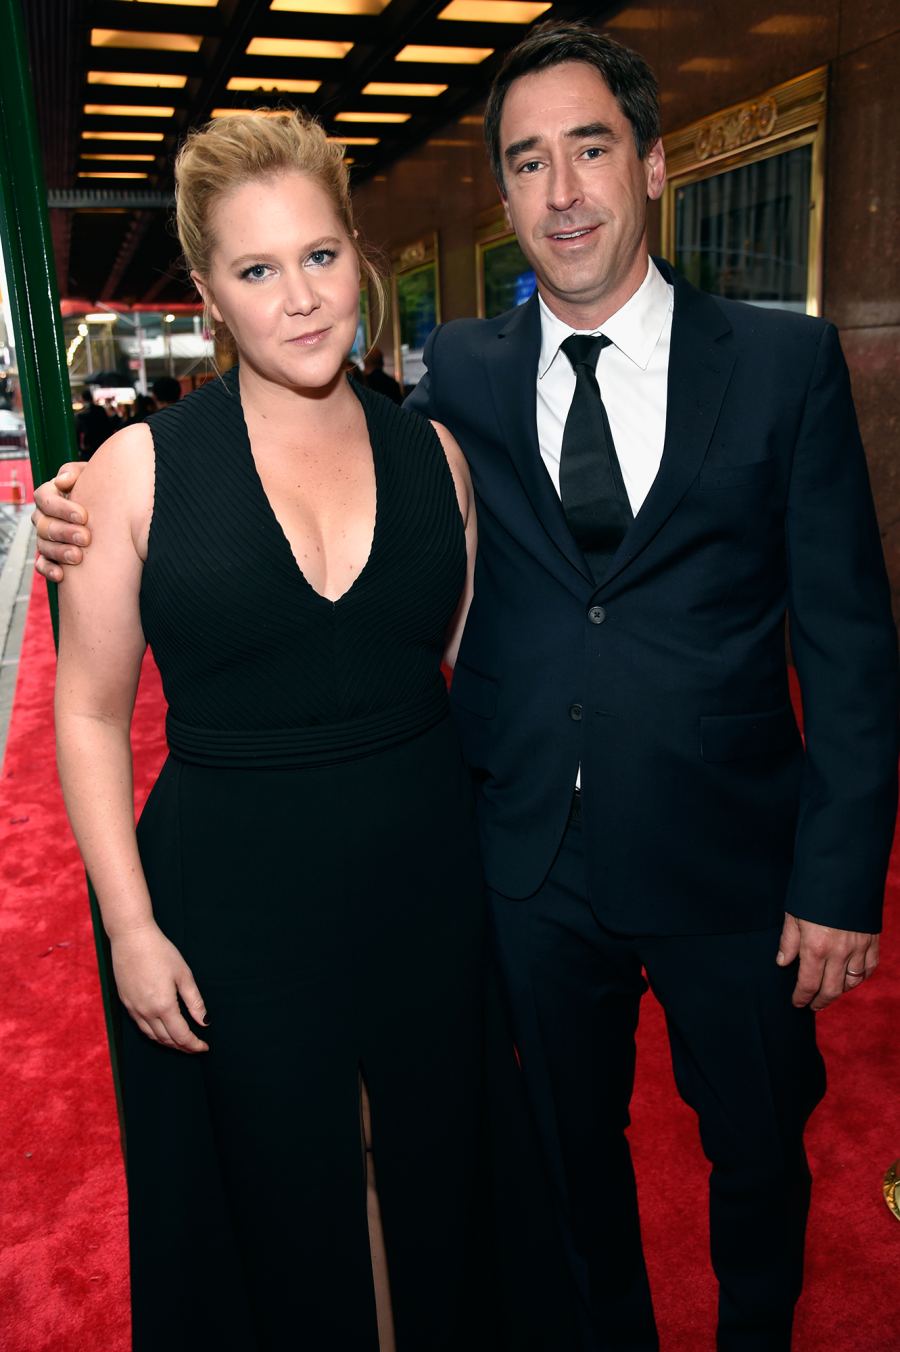 Celebrities Who Married Chefs: Amy Schumer, Neil Patrick Harris and More